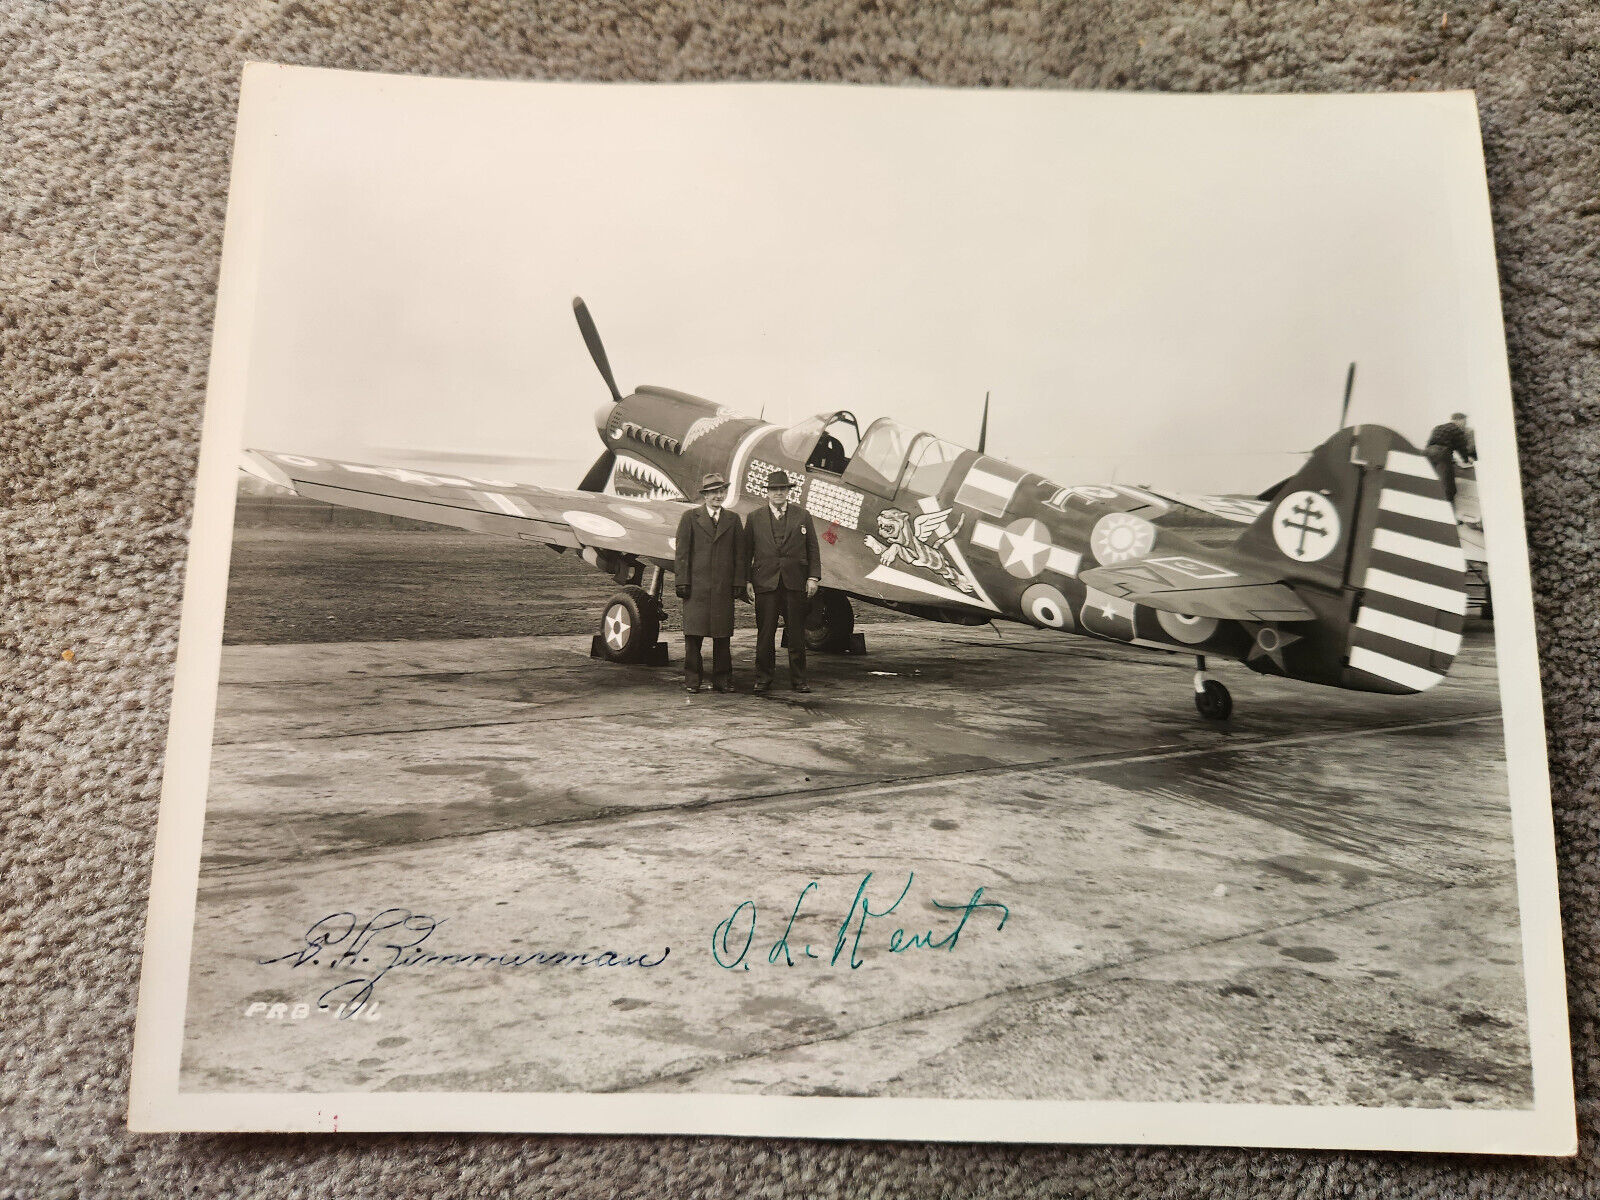 1944 SIGNED 8" x 10" PHOTO OF CURTIS P-40 FIGHTER PLANE WITH UNIQUE MARKINGS